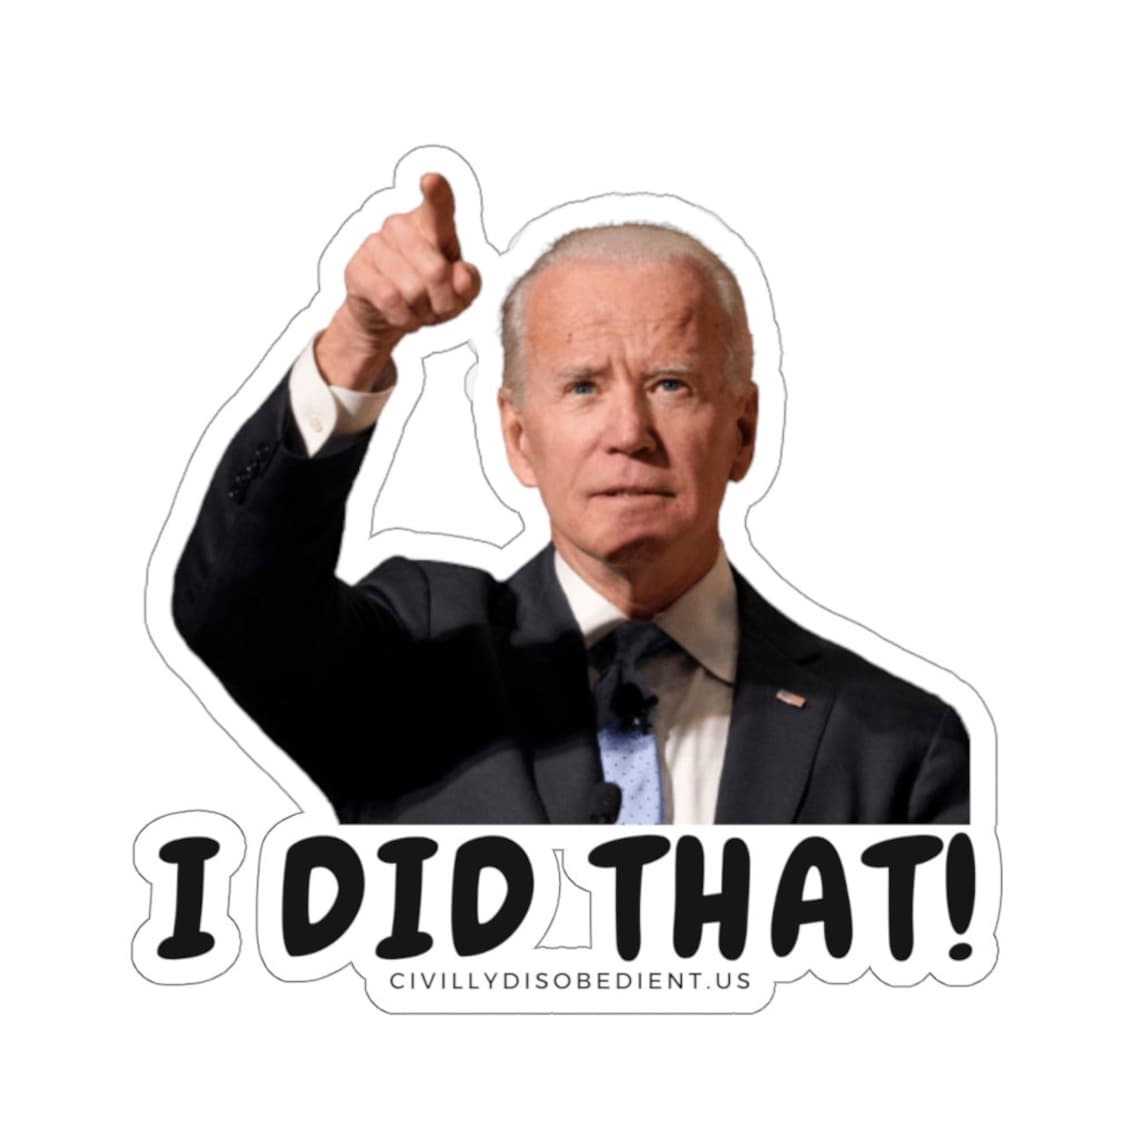 I DID THAT Bidenflation Decal image 1